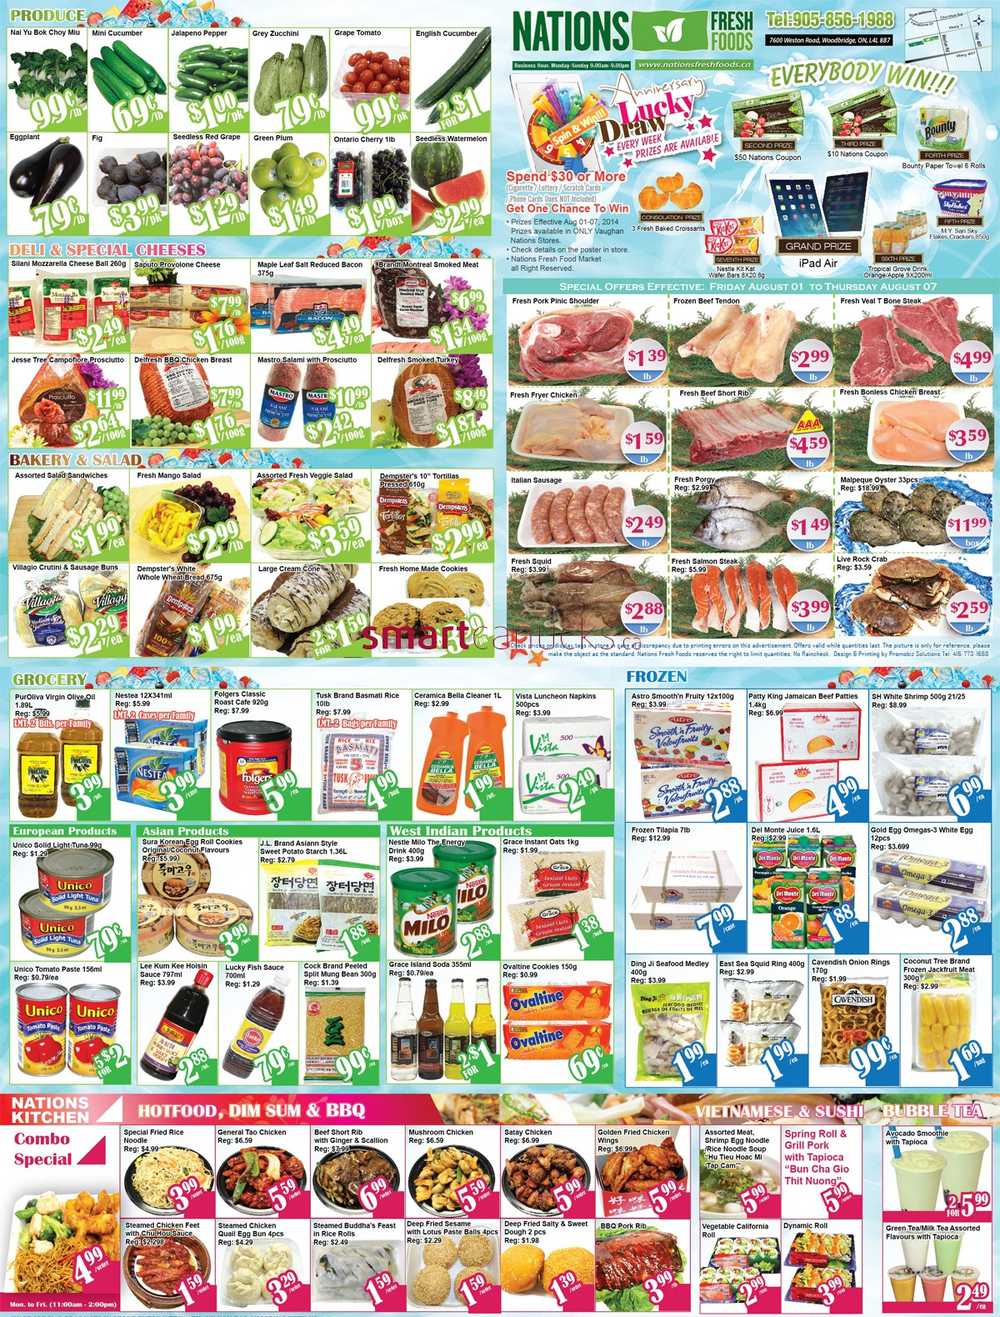 Nations Fresh Foods Flyer (Vaughan) August 1 to August 7